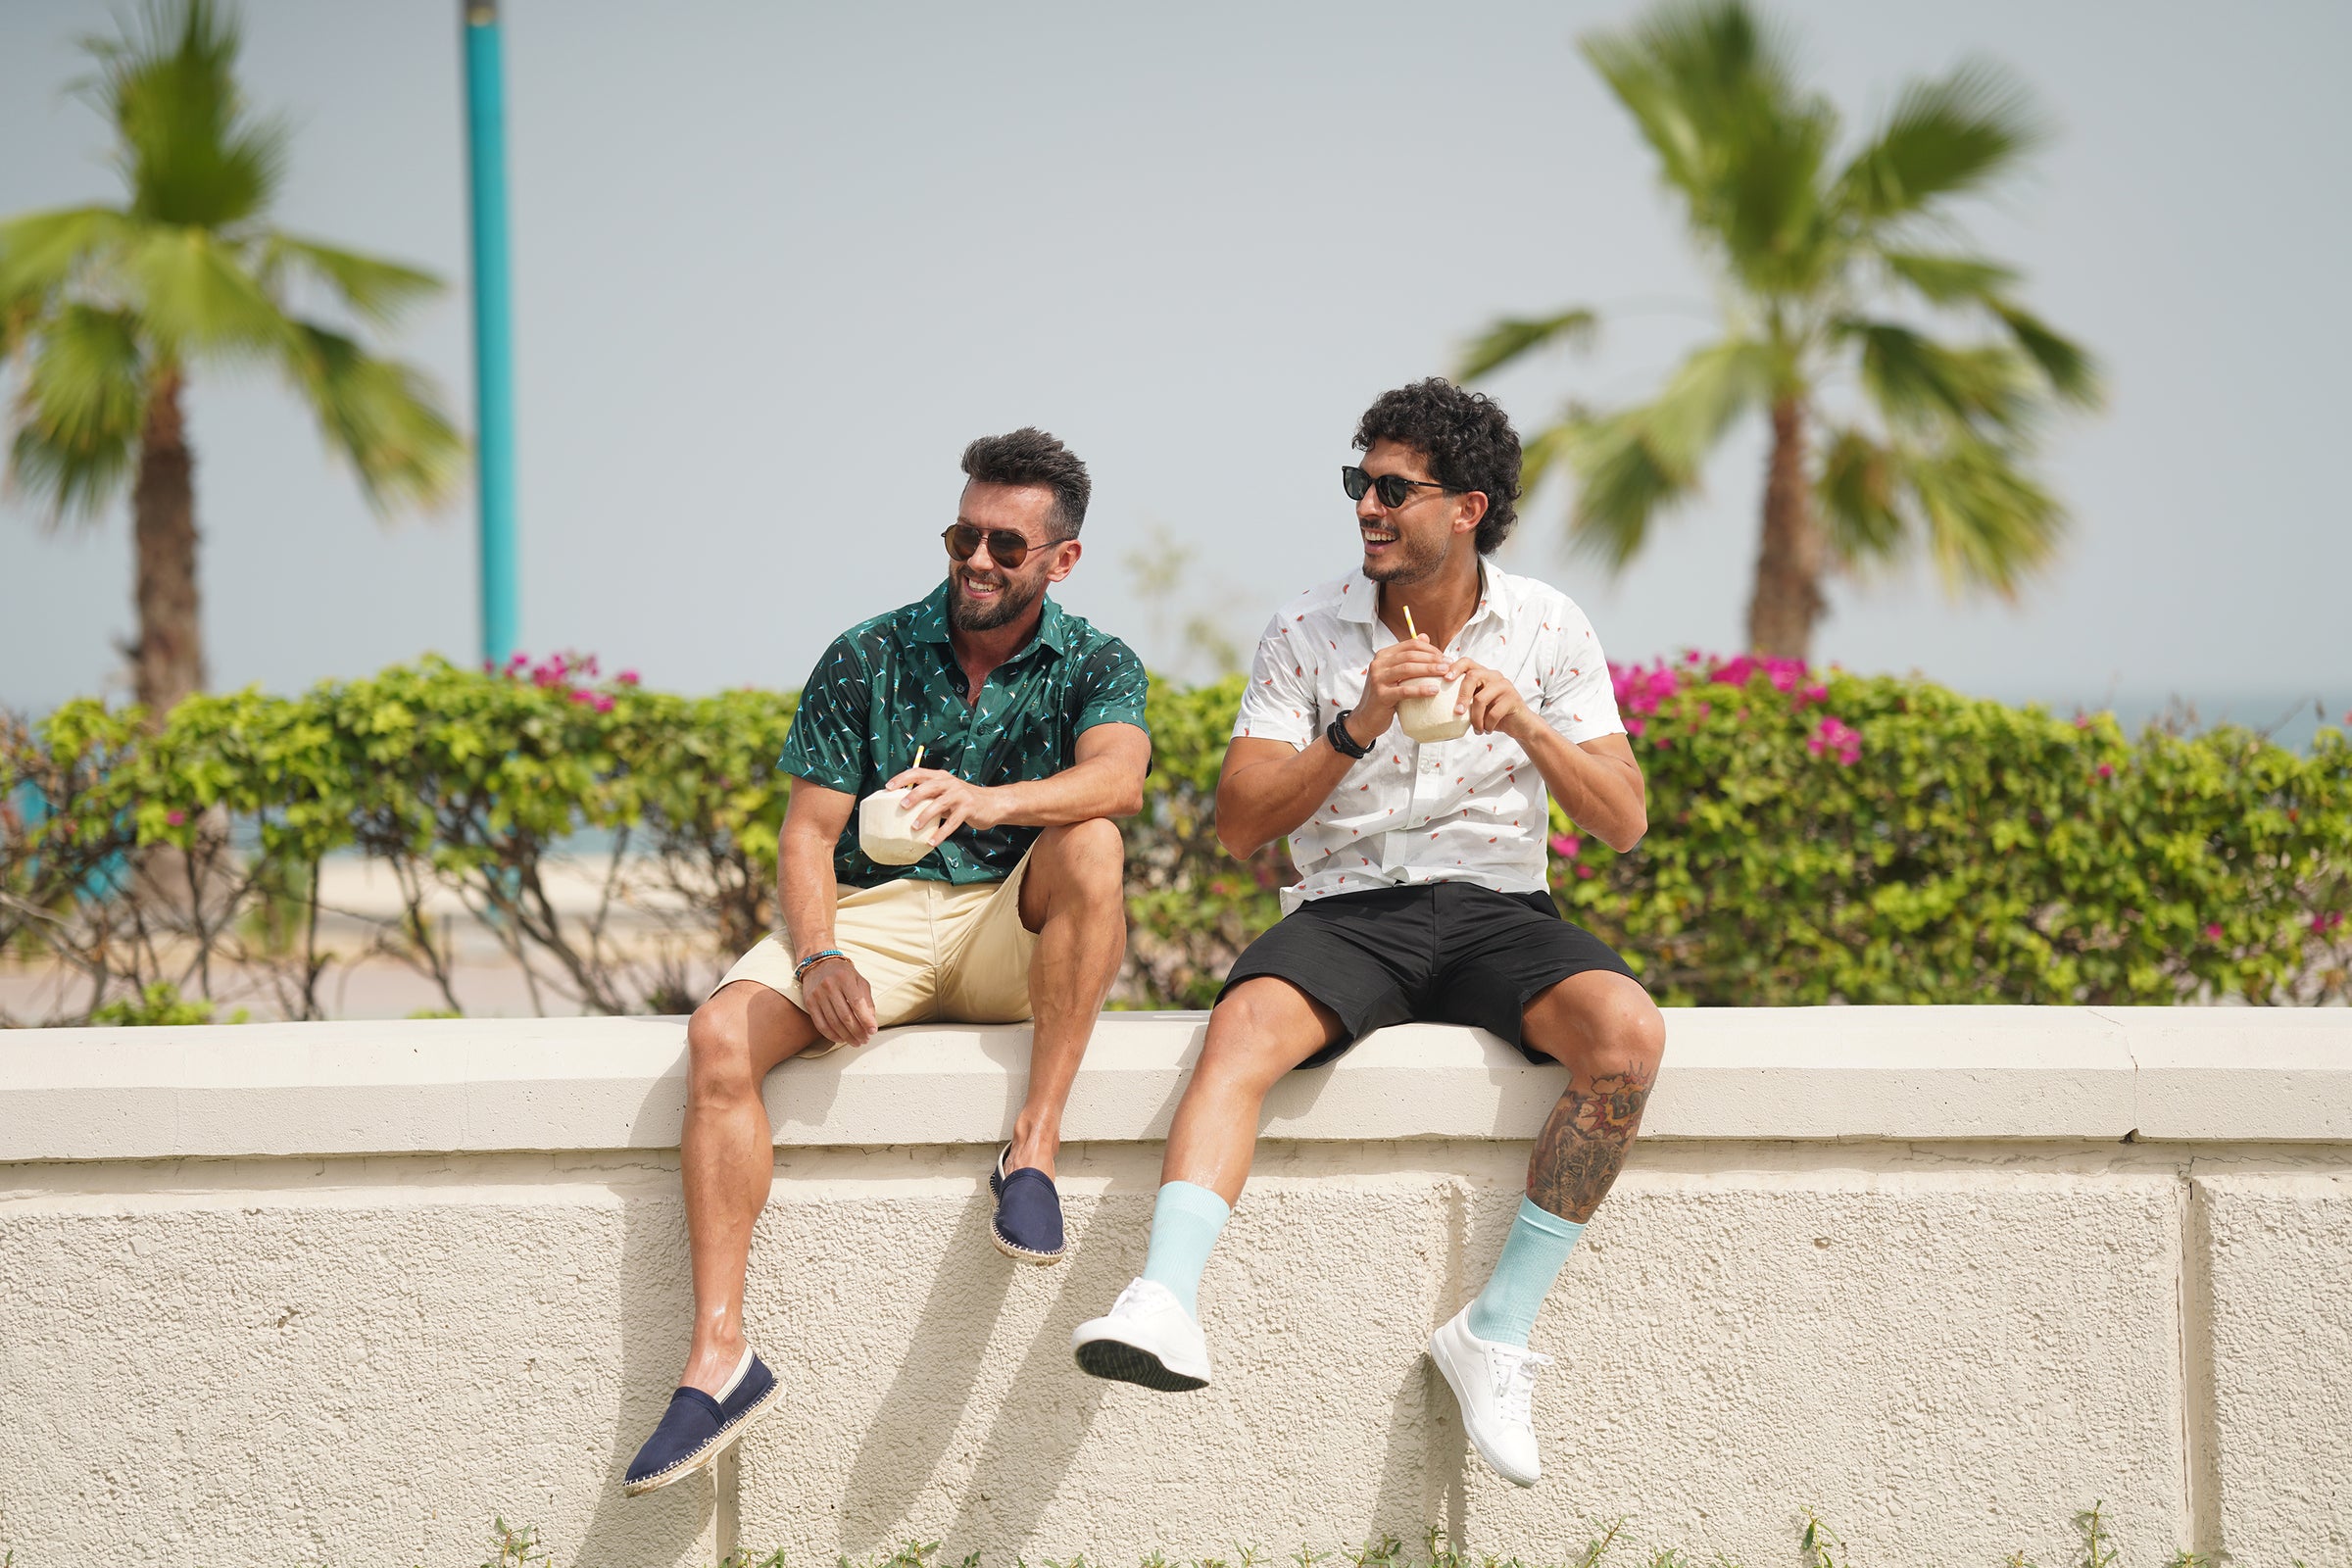 two men in casual attire sitting on a wall, wearing shorts and shirts, engaged in conversation. happy bay